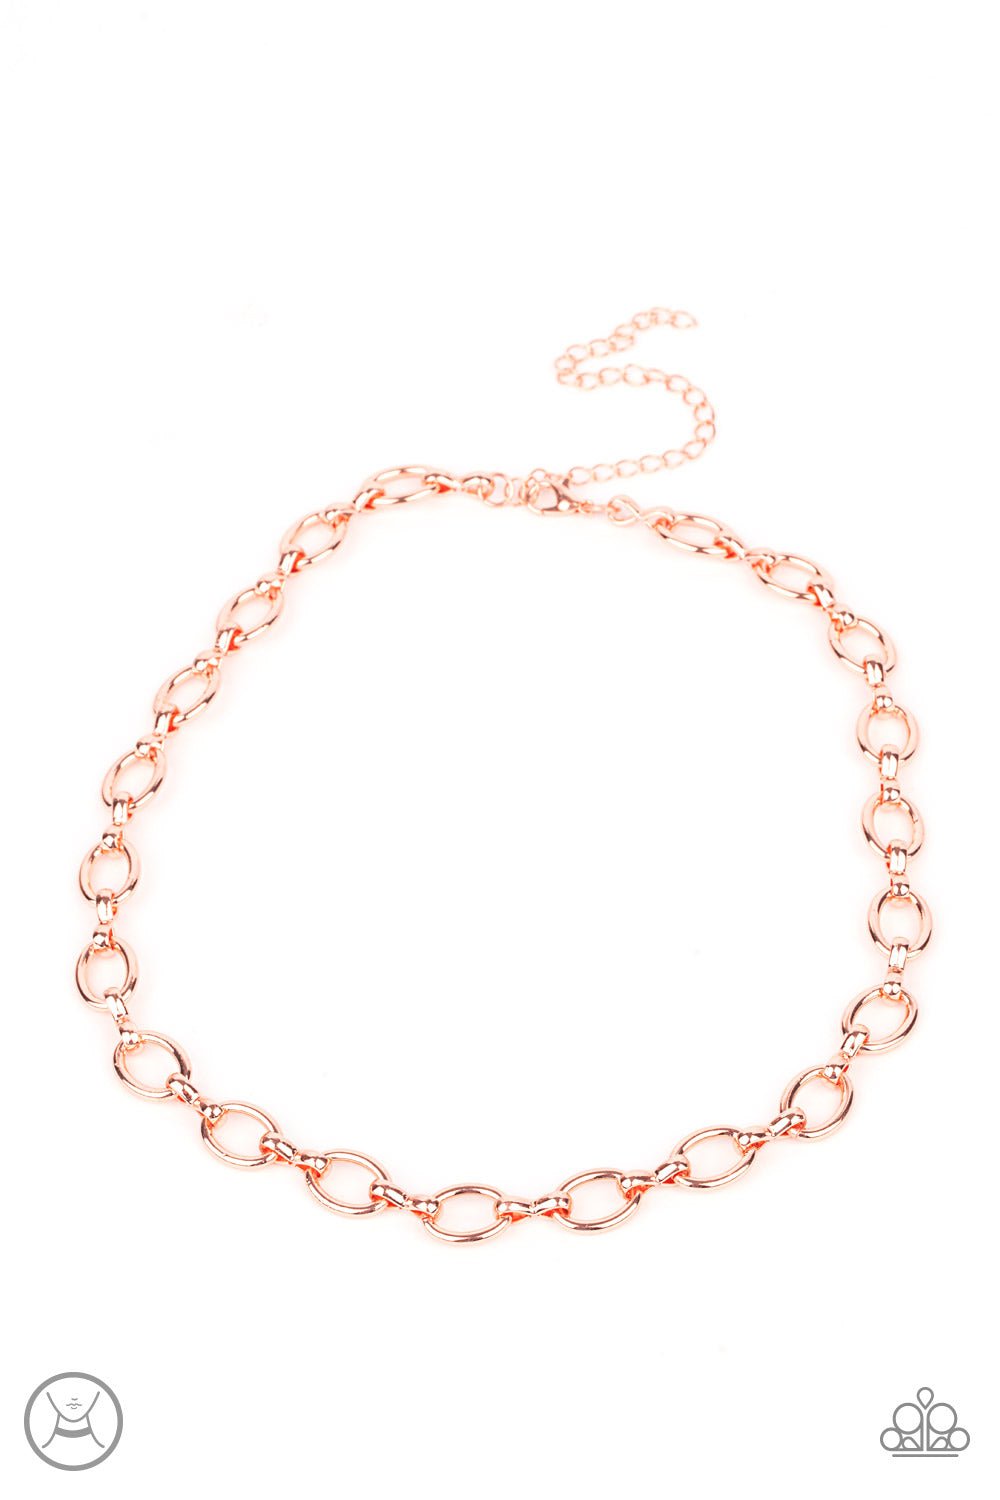 Craveable Couture Copper Choker Necklace - Paparazzi Accessories  A collection of oversized shiny copper ovals and shiny copper fittings interlock around the neck, creating an intense industrial look. Features an adjustable clasp closure.  All Paparazzi Accessories are lead free and nickel free!  Sold as one individual choker necklace. Includes one pair of matching earrings.